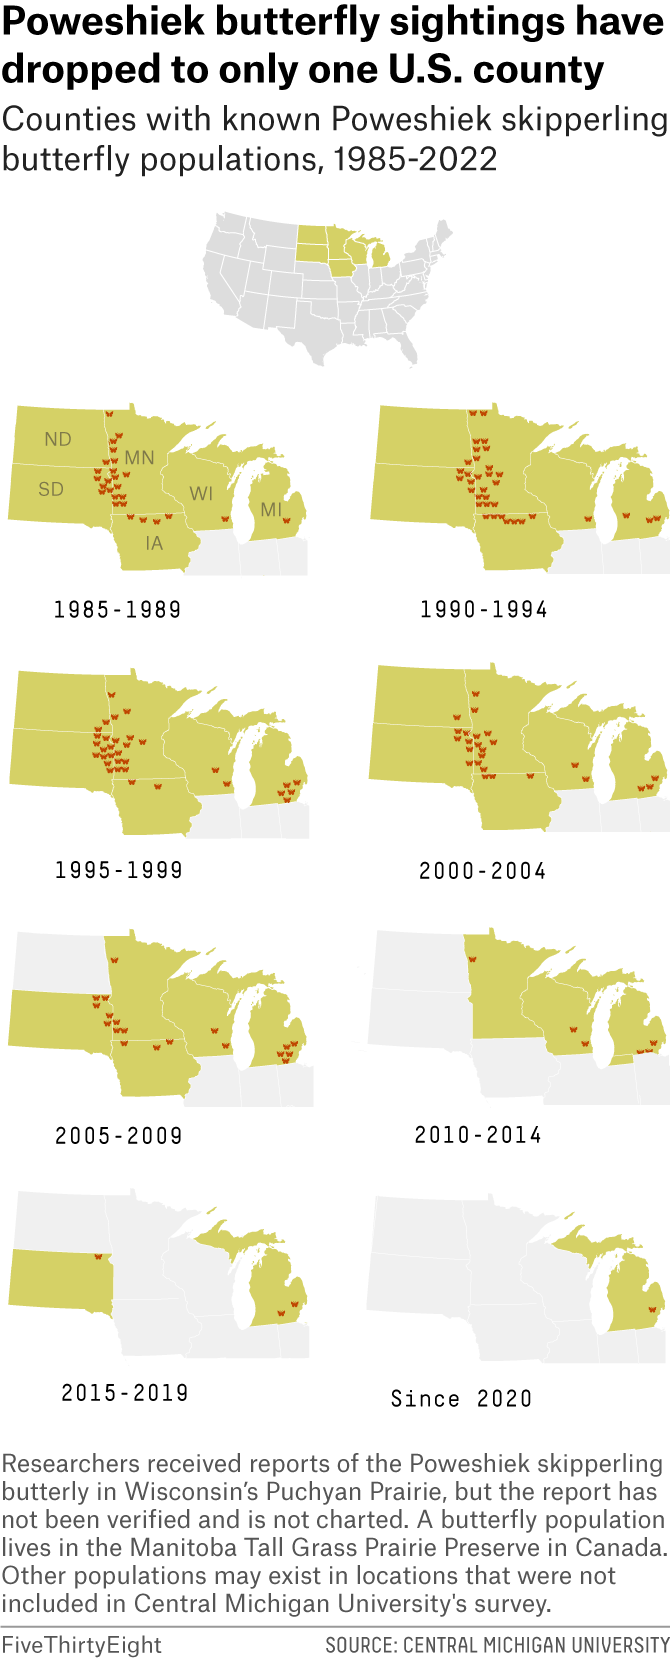 A series of eight maps showing where Poweshiek butterflies have been sighted, with each map representing a five-year interval. Starting in 1985, the butterflies were found in six different states across the Upper Midwest. Since 2020, they've only been spotted in one sight in Michigan.